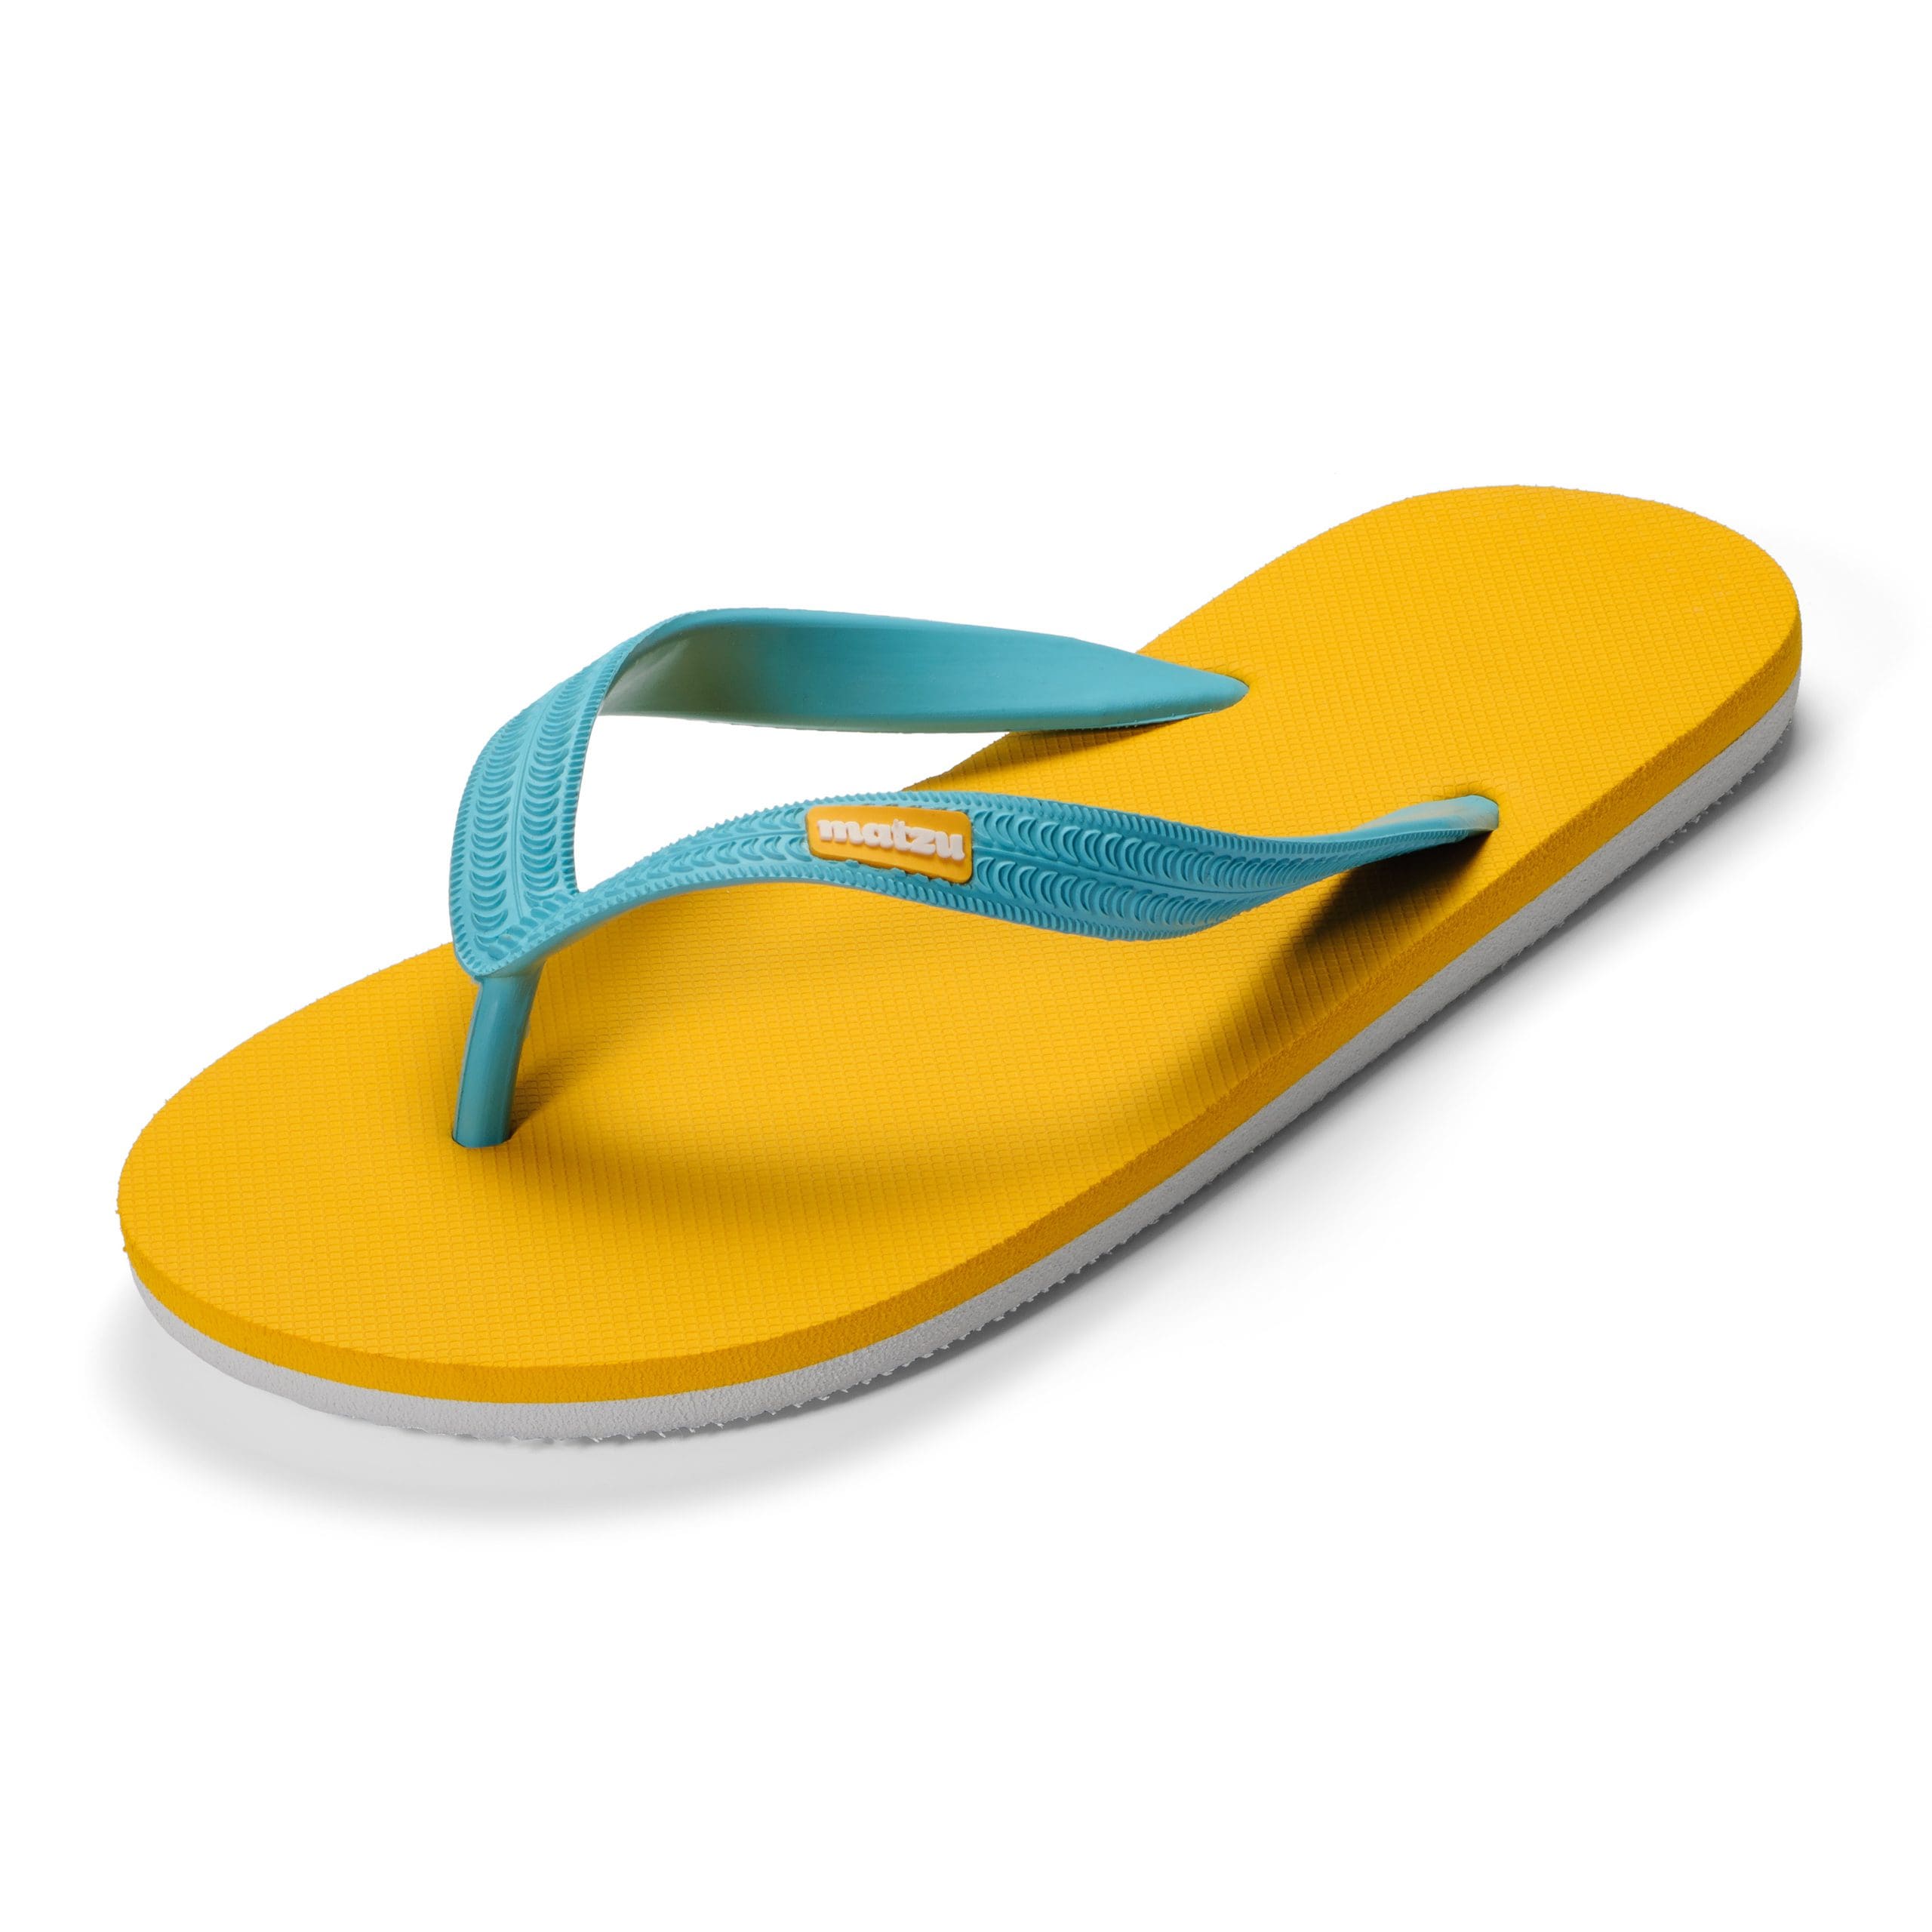 A high quality photo of a blue and yellow beach sandal.